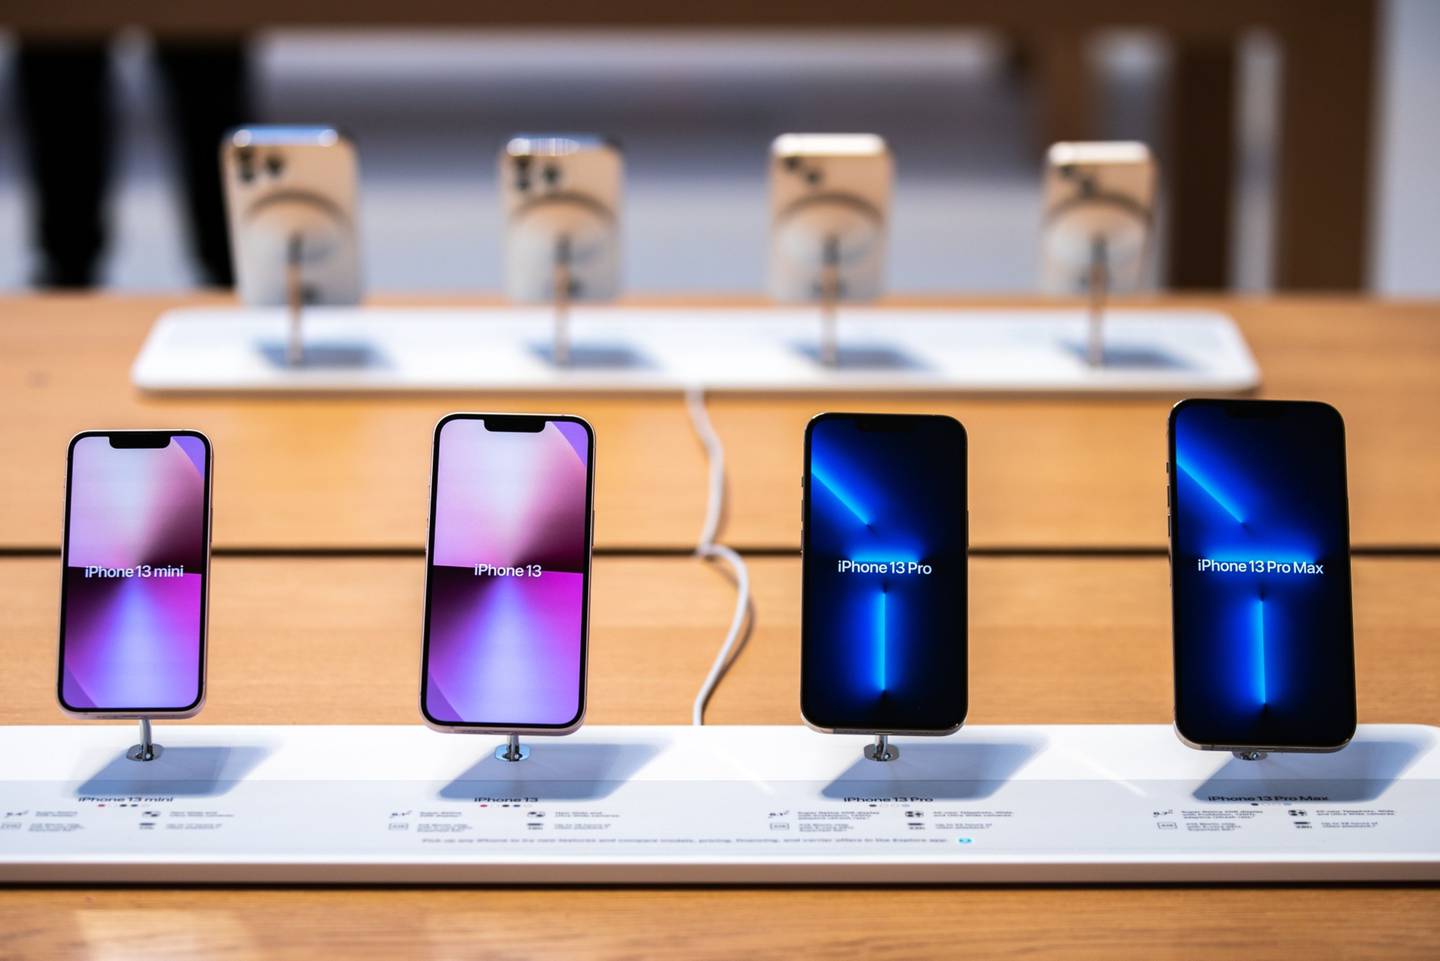 Apple iPhone 13 Mini, iPhone 13, iPhone 13 Pro and iPhone 13 Pro Max smartphones for sale at a store in New York, U.S., on Friday, Sept. 24, 2021.